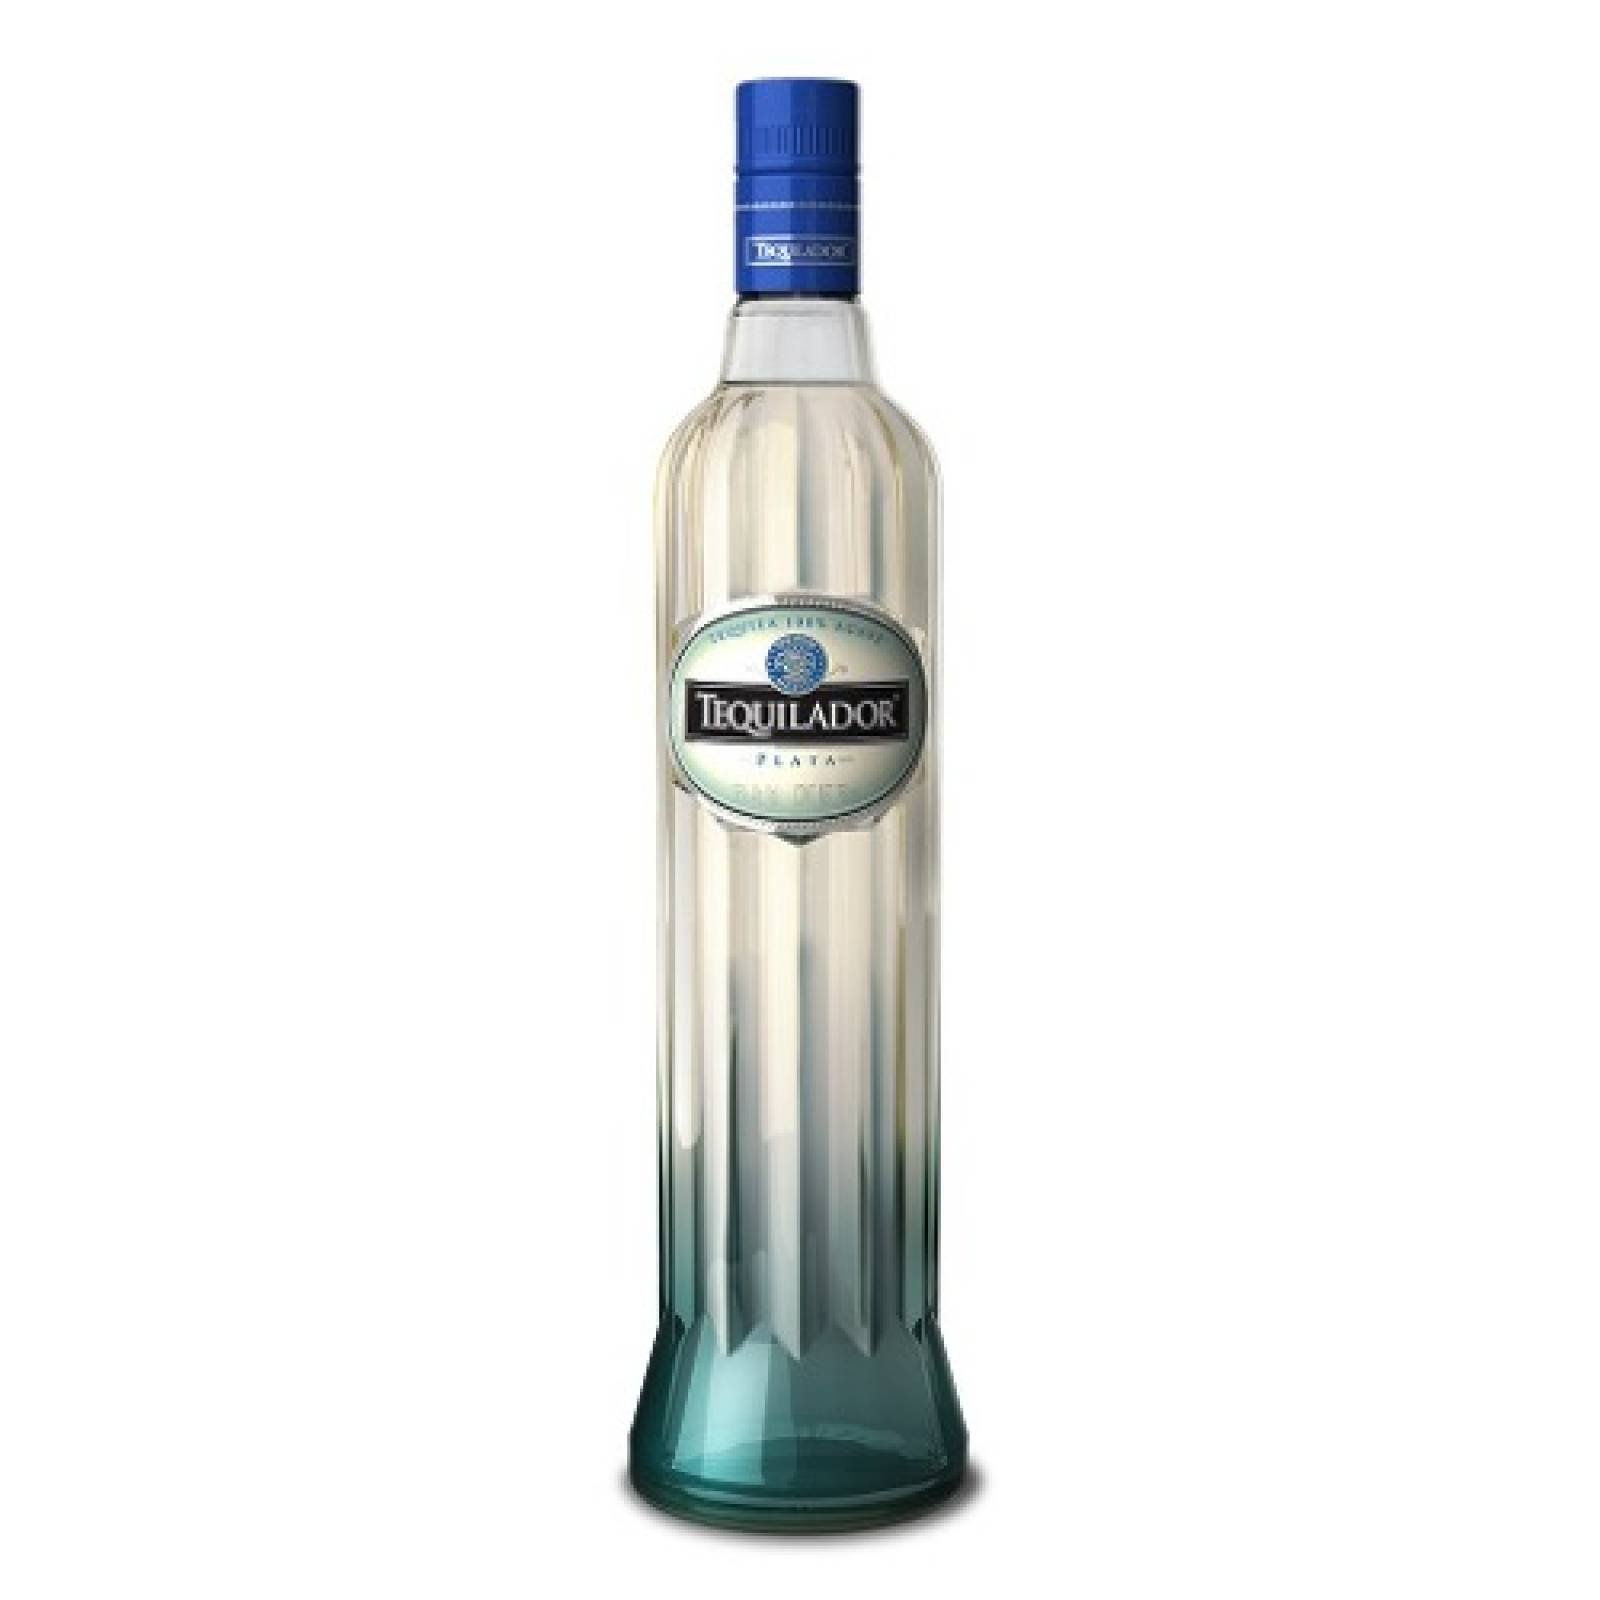 Tequilador Plata 750ml Tequila 100% Agave Azul 35% Vol Alc